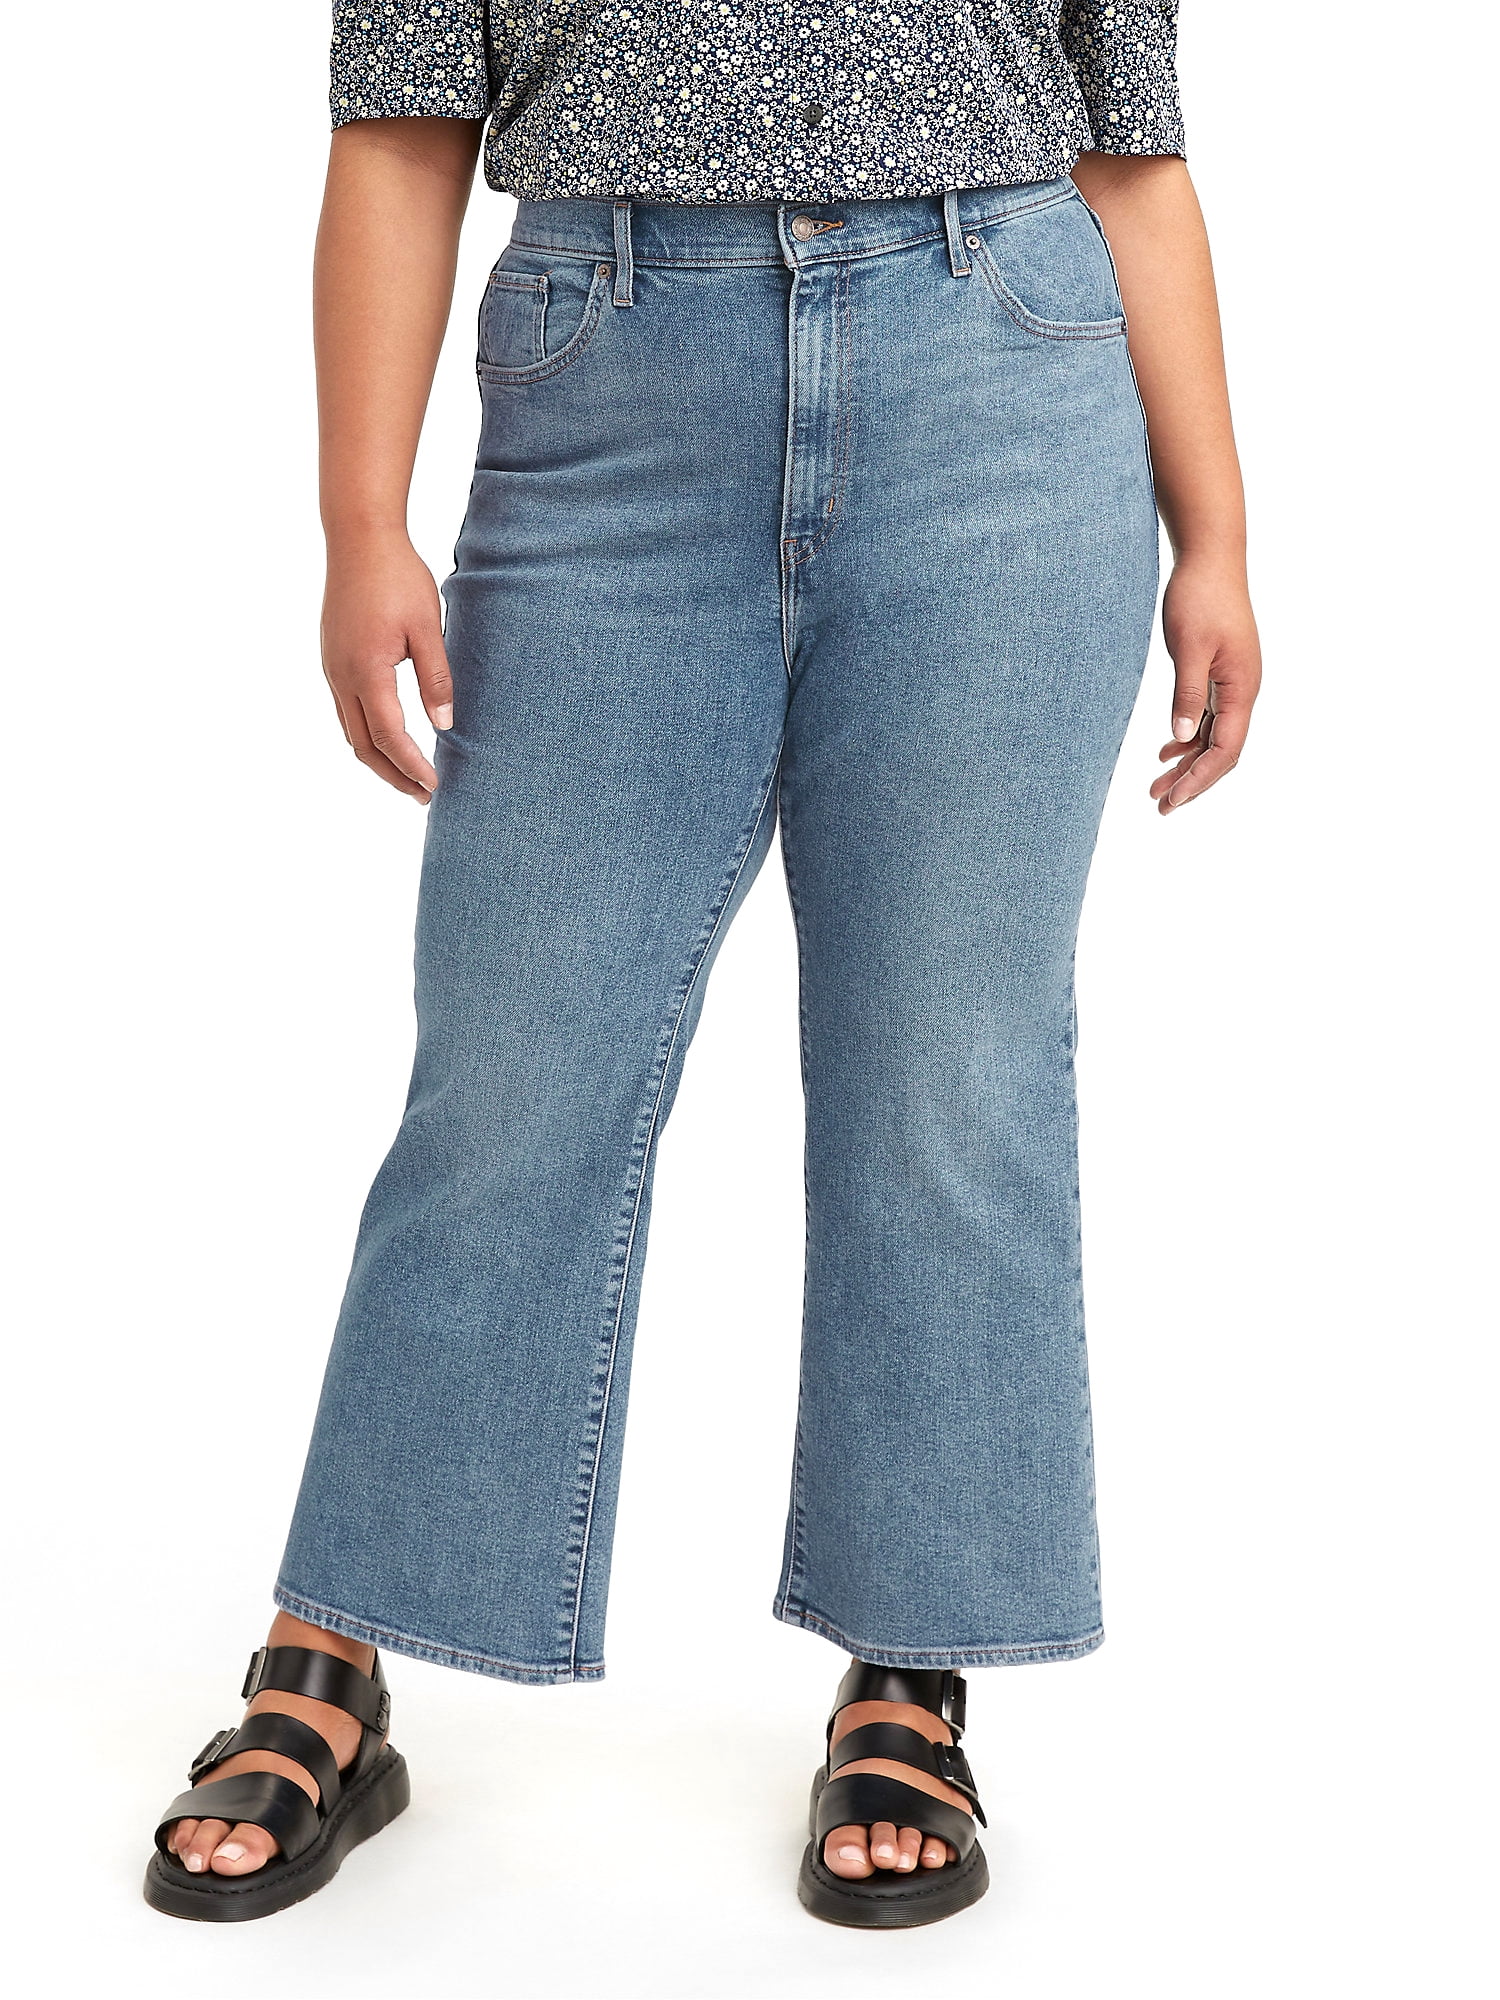 Levi's Women's Plus Size High Waisted Cropped Flare Jeans - Walmart.com